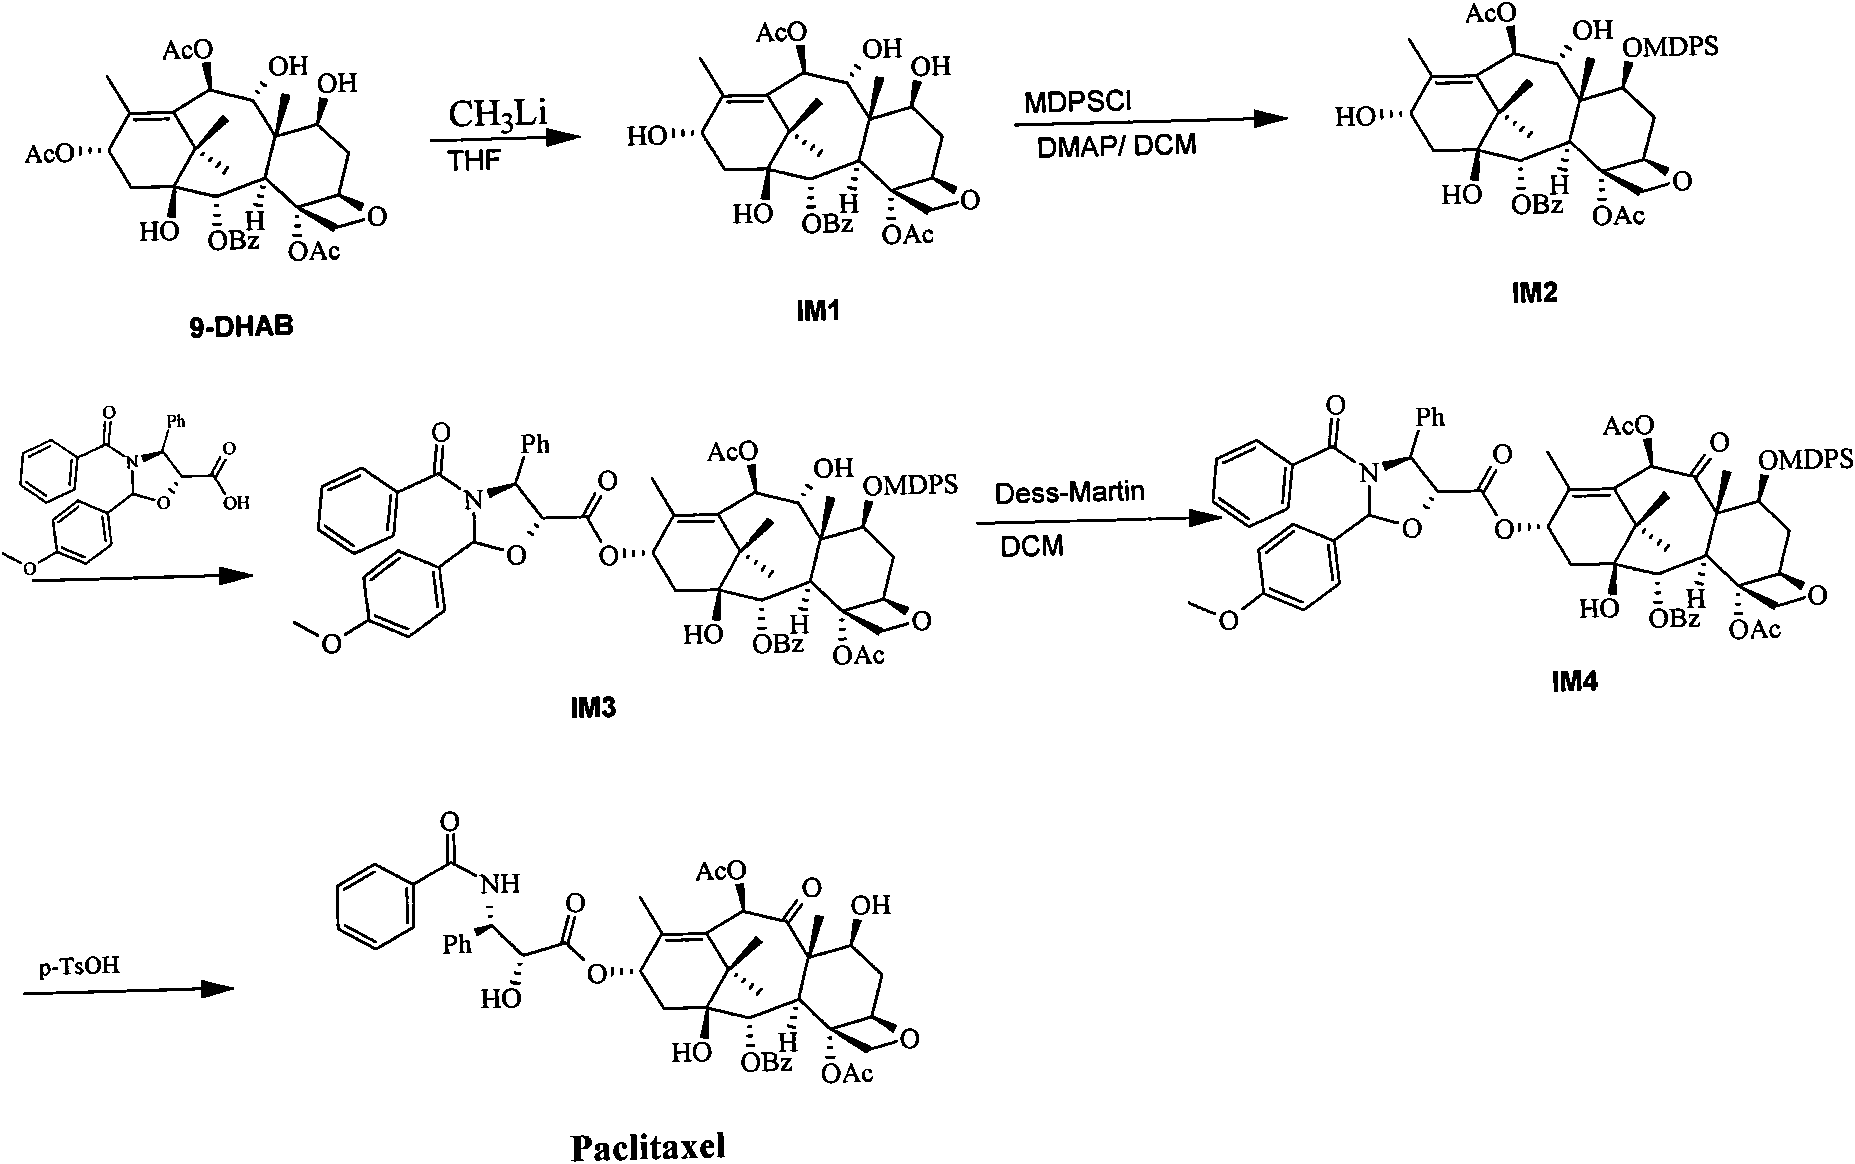 Method for semi-synthesizing paclitaxel and docetaxel